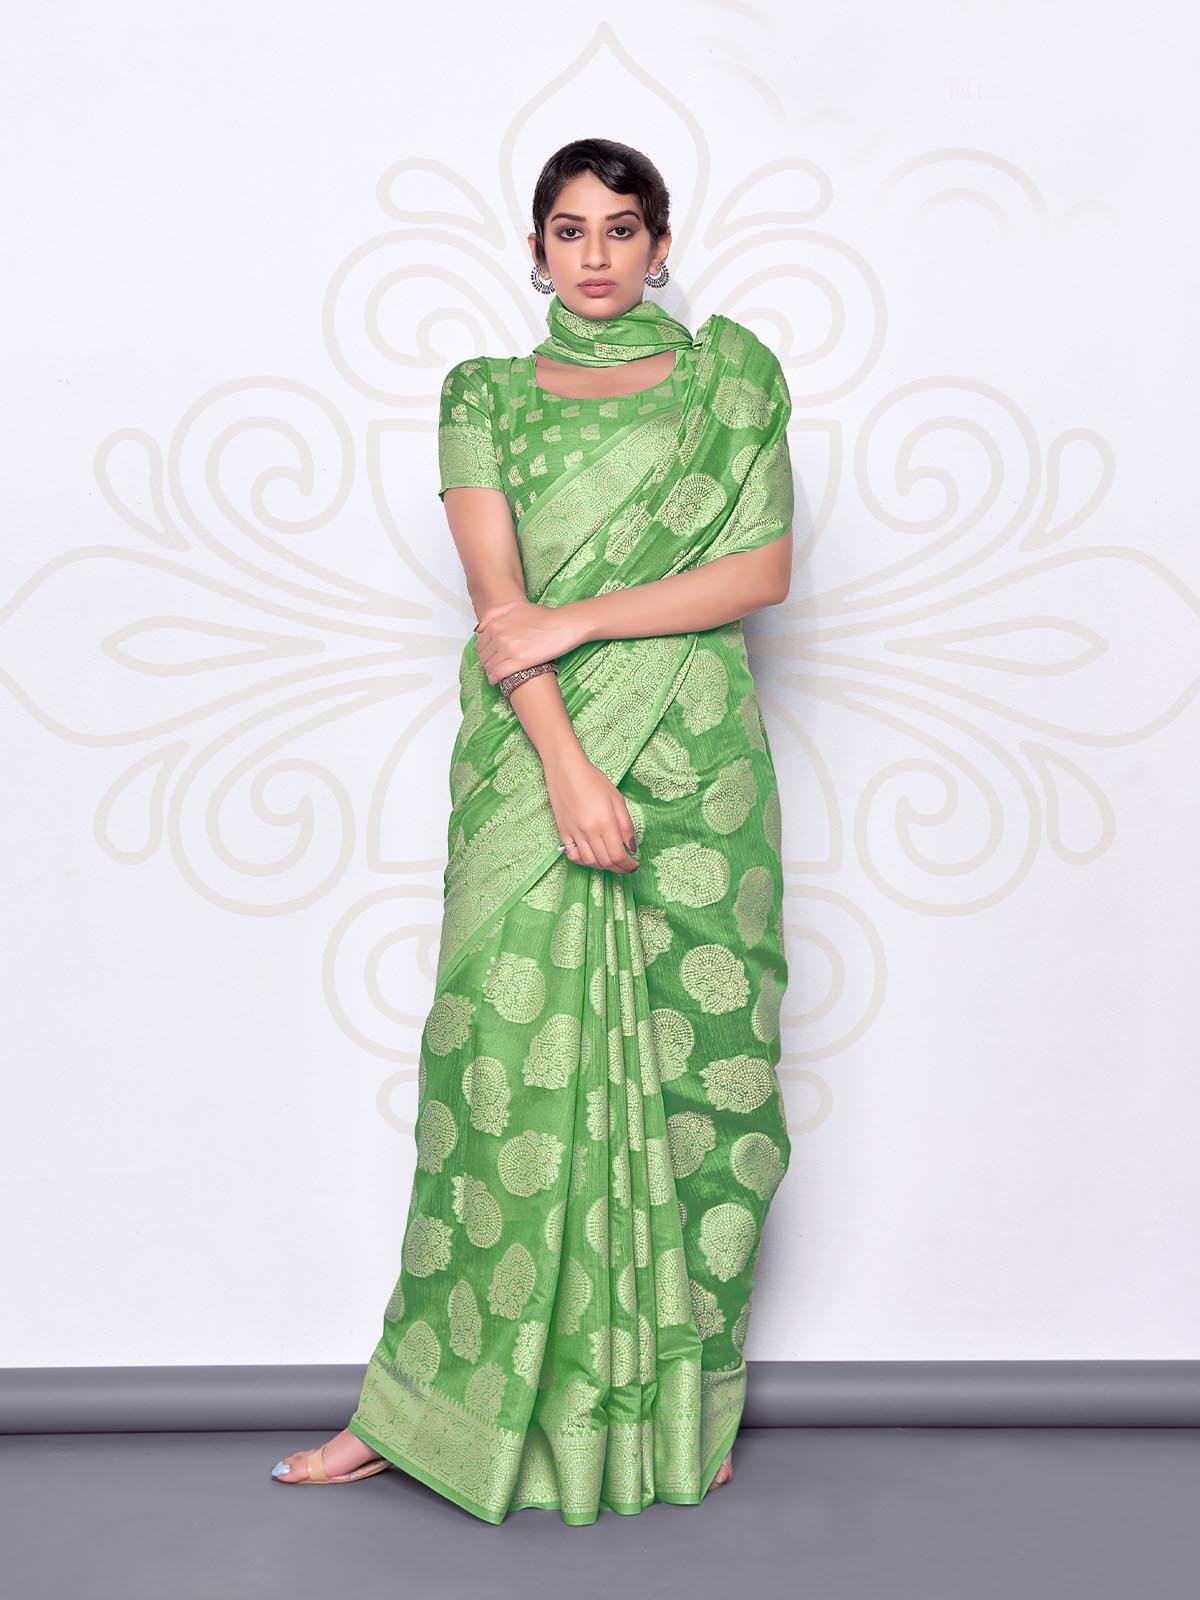 Women's Green Lucknowi Cotton Hand Weaving Work Saree With Blouse Piece - Odette